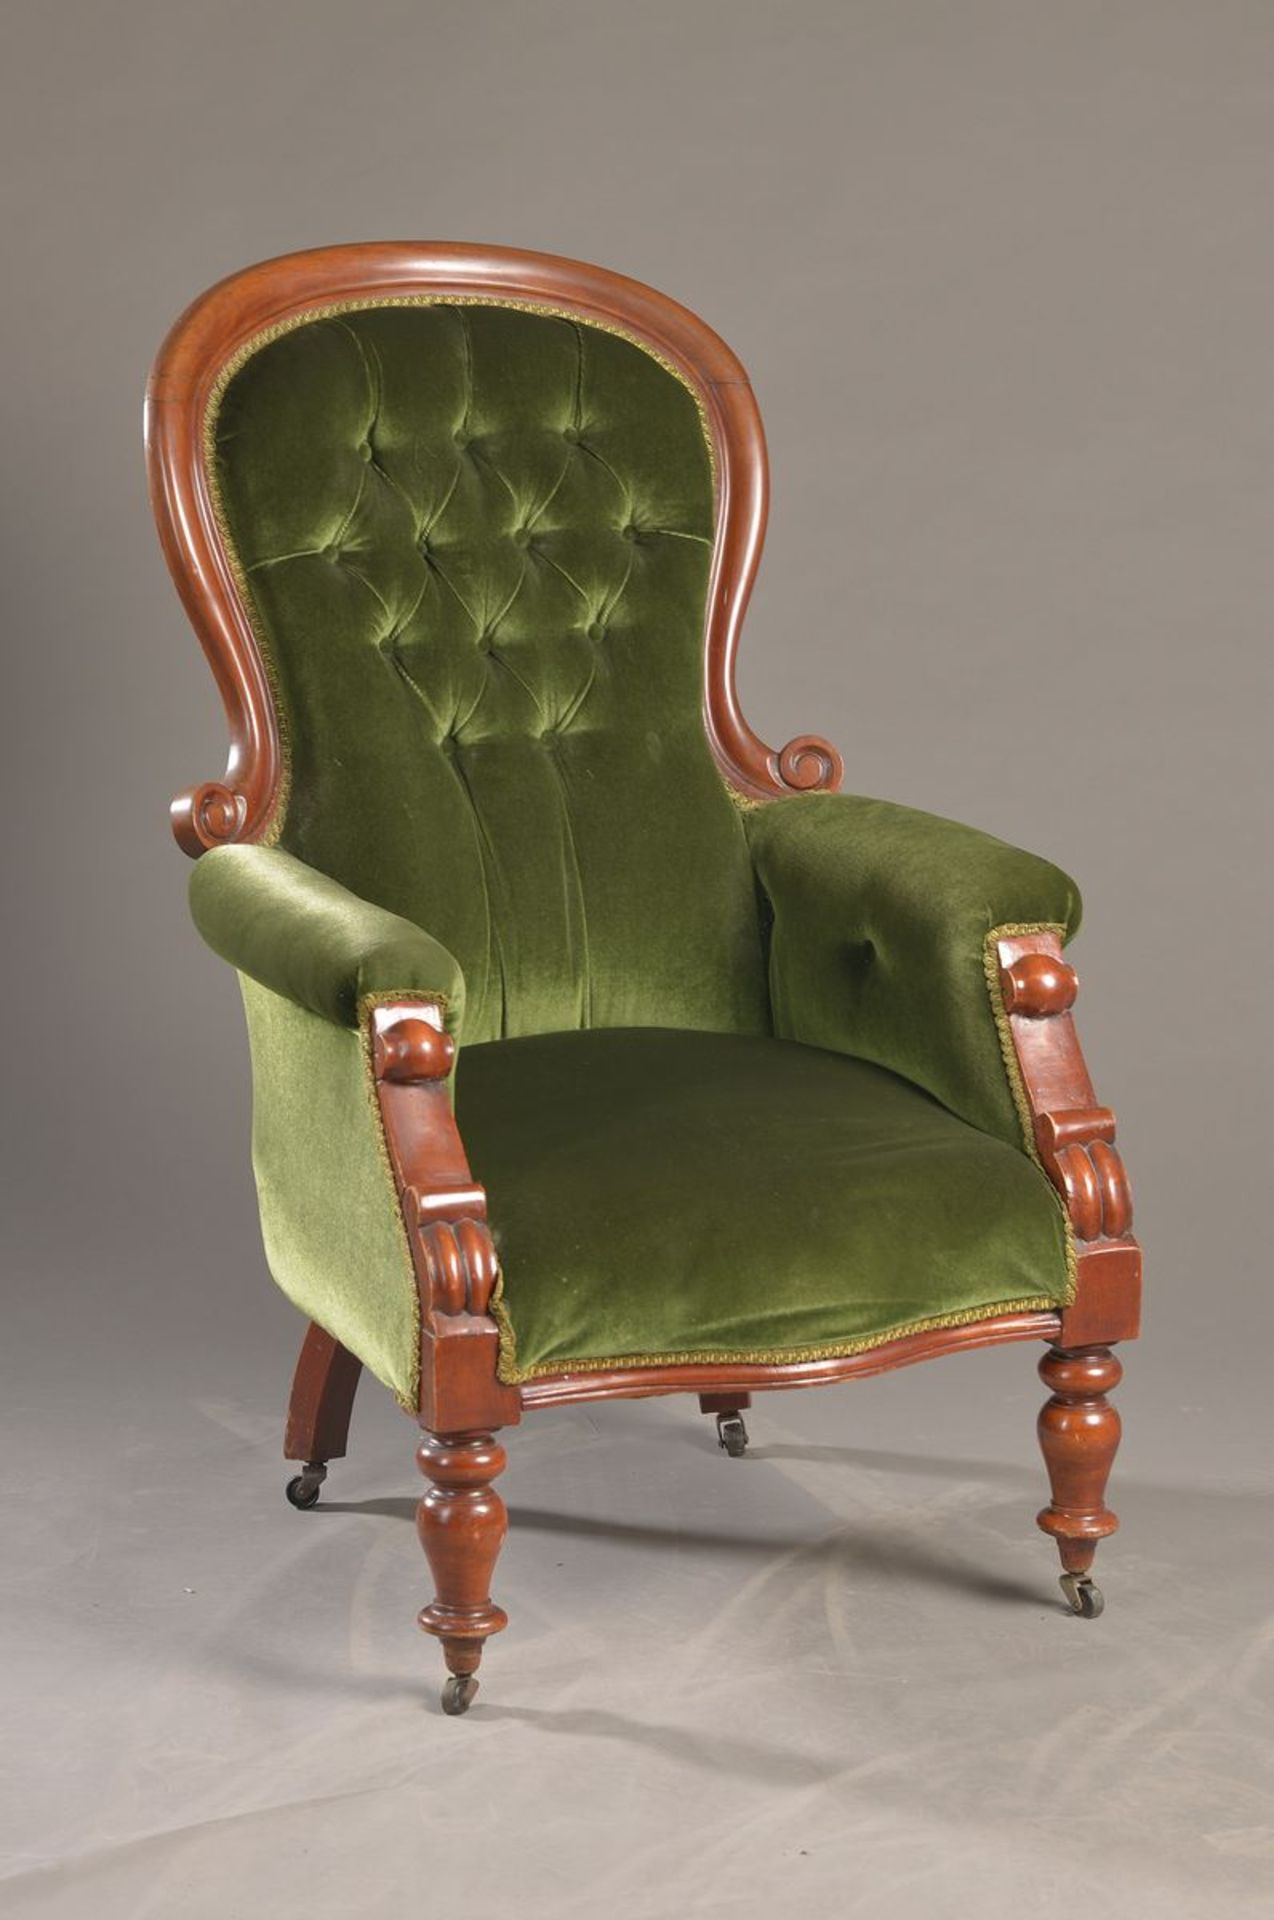 Armchair, France, 2.half 19th c., Mahogany, partly turned, nubby spine, green relation, upholstery